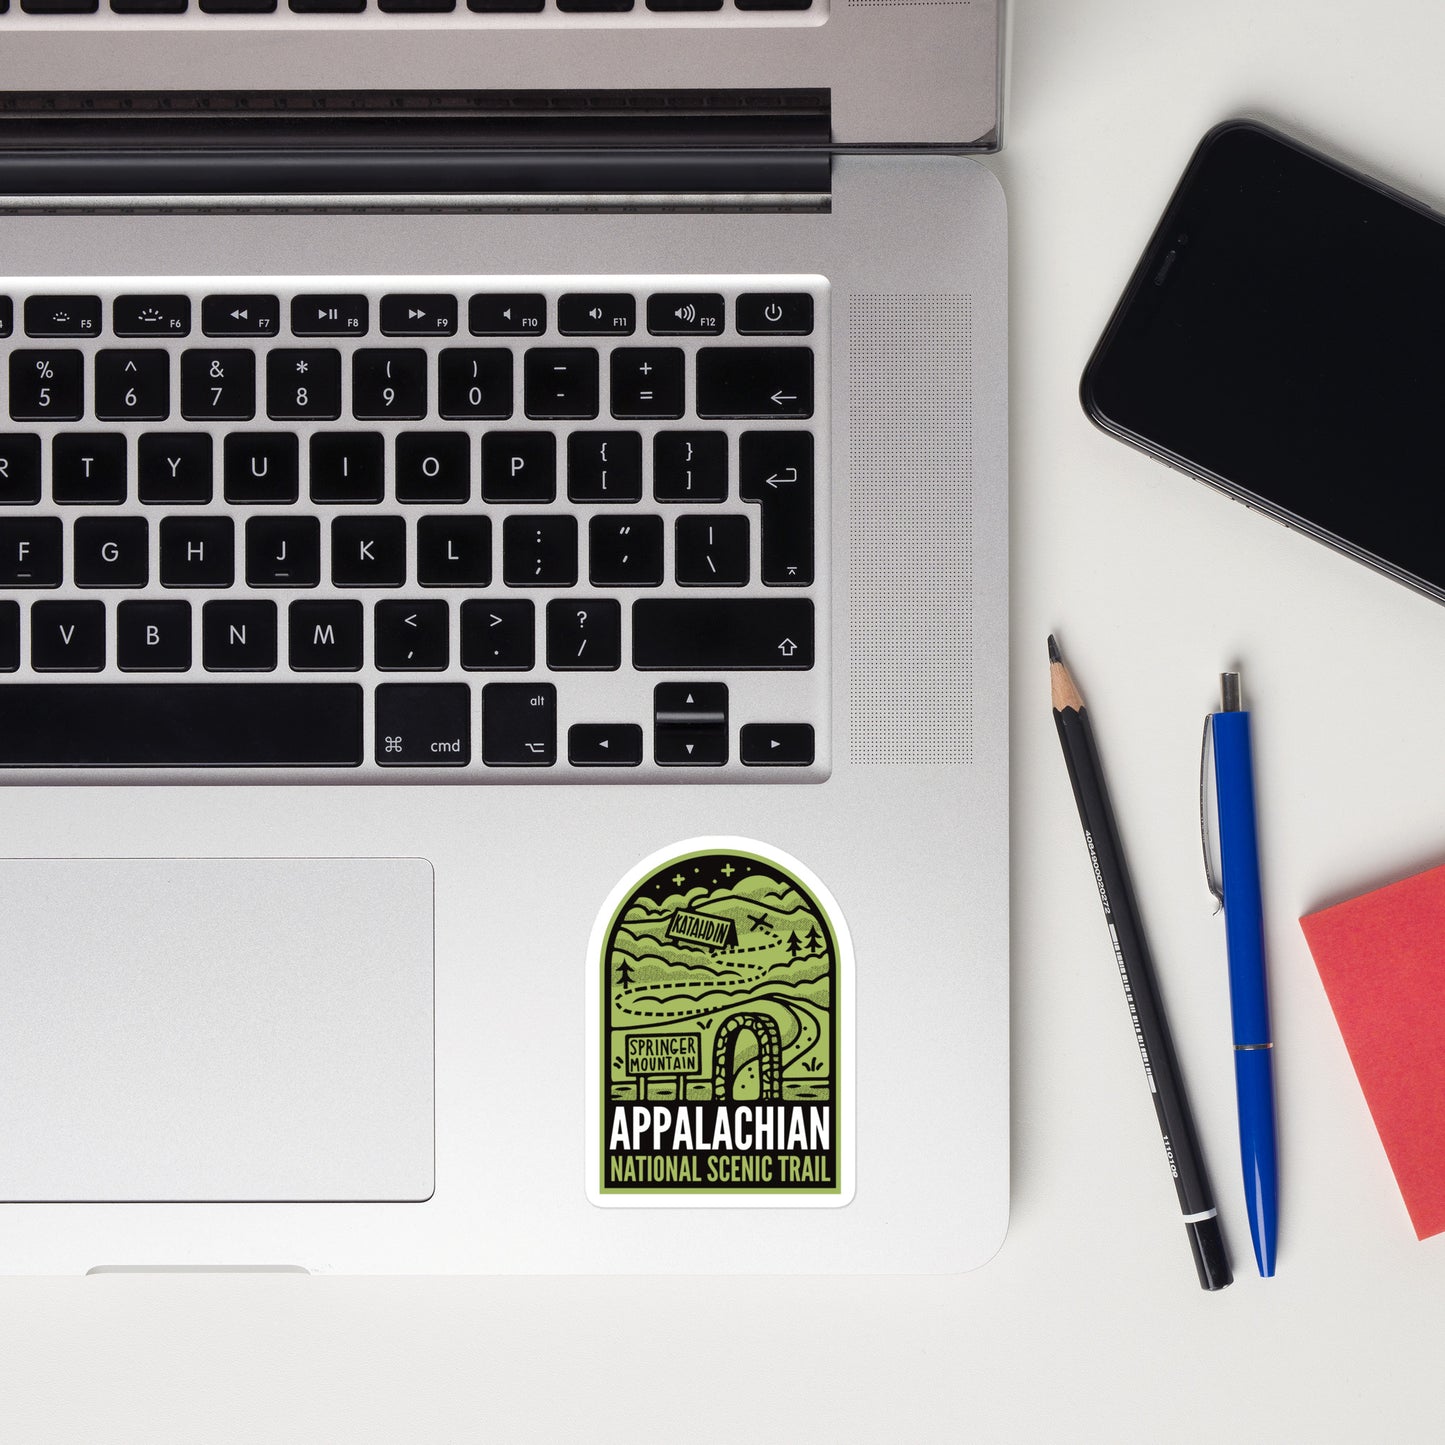 A sticker design of the Appalachian Trail on a laptop